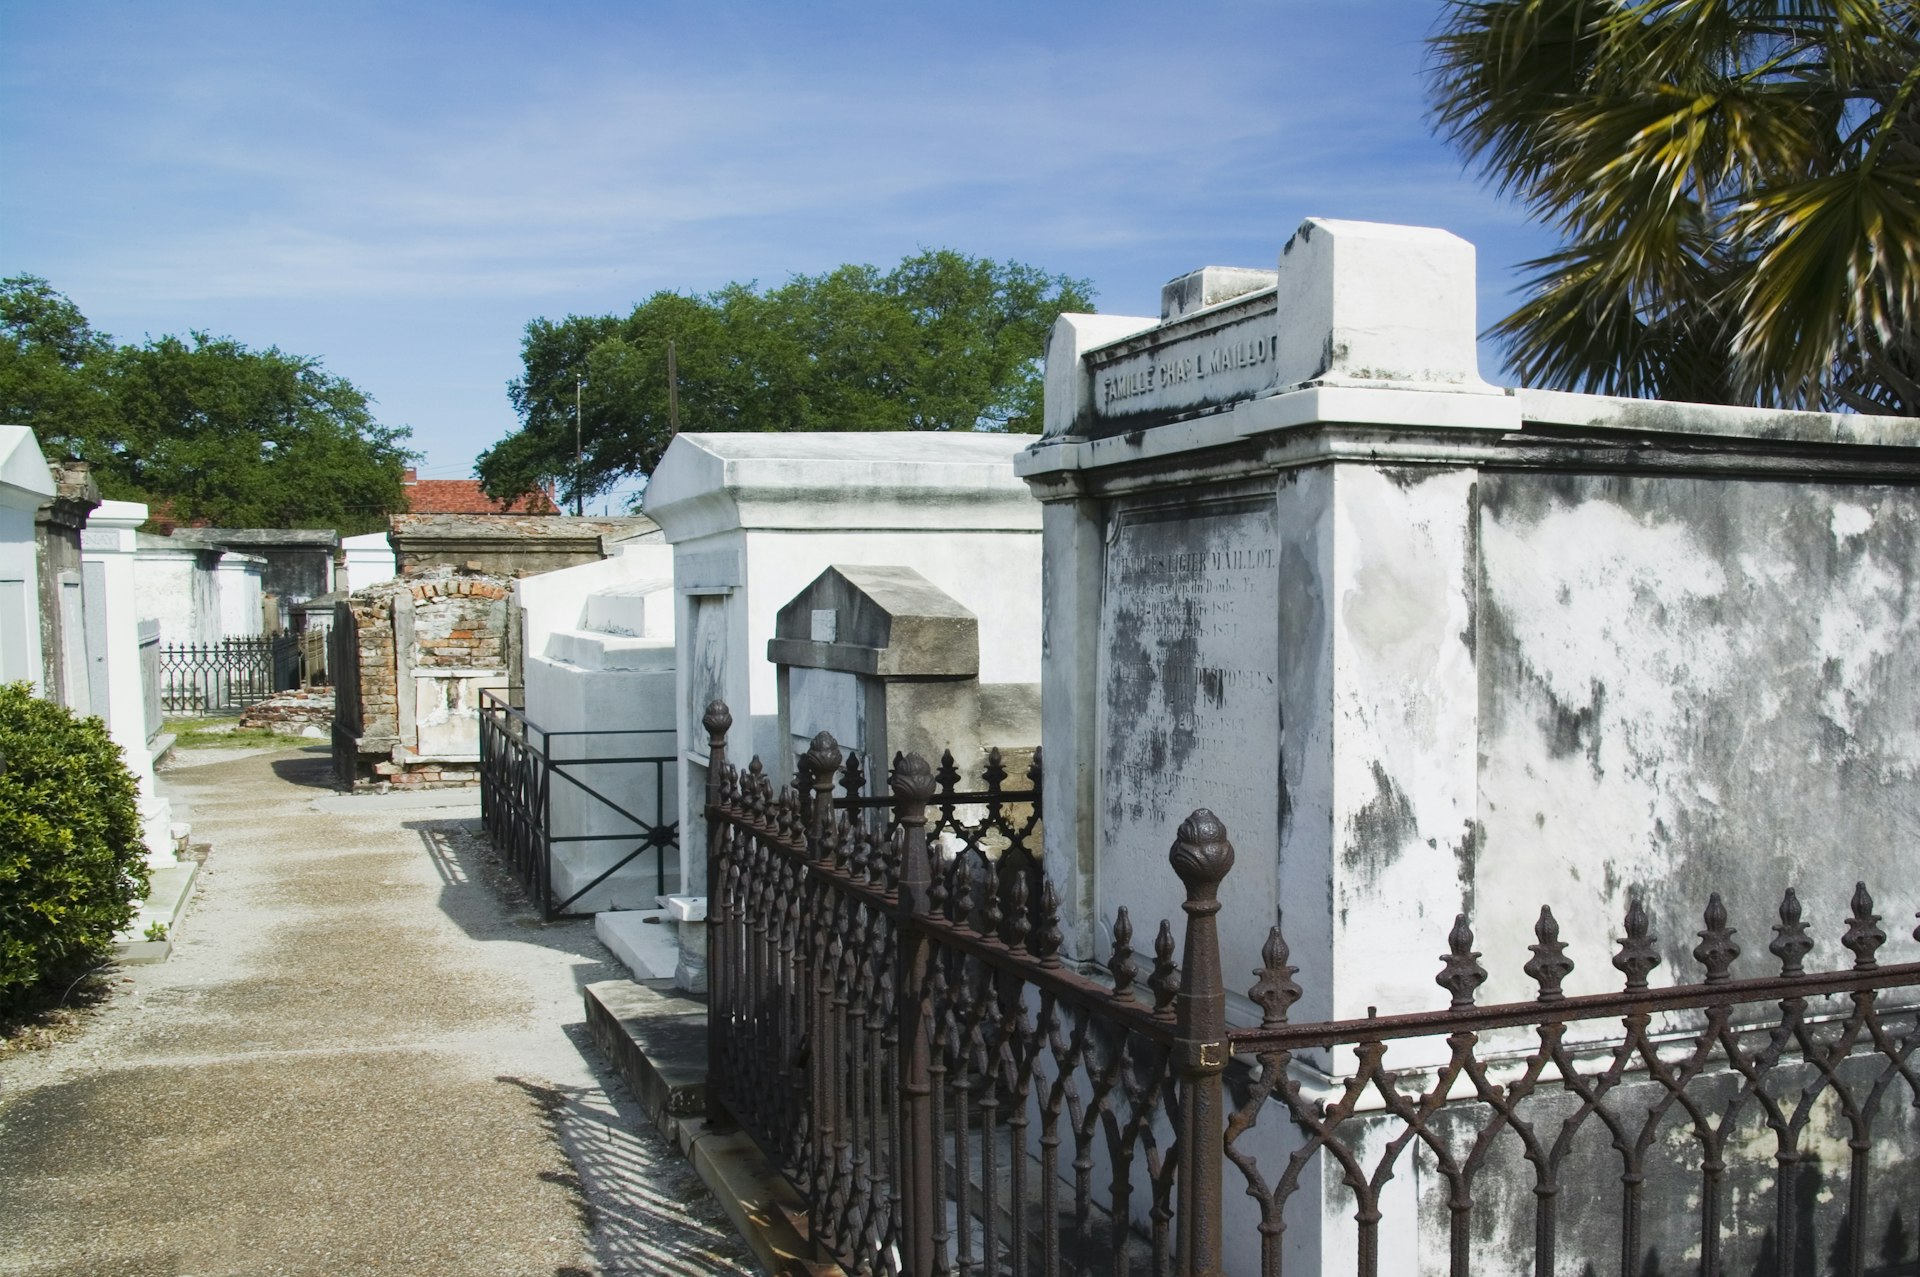 A row of above-ground mausoleums in New Orleans